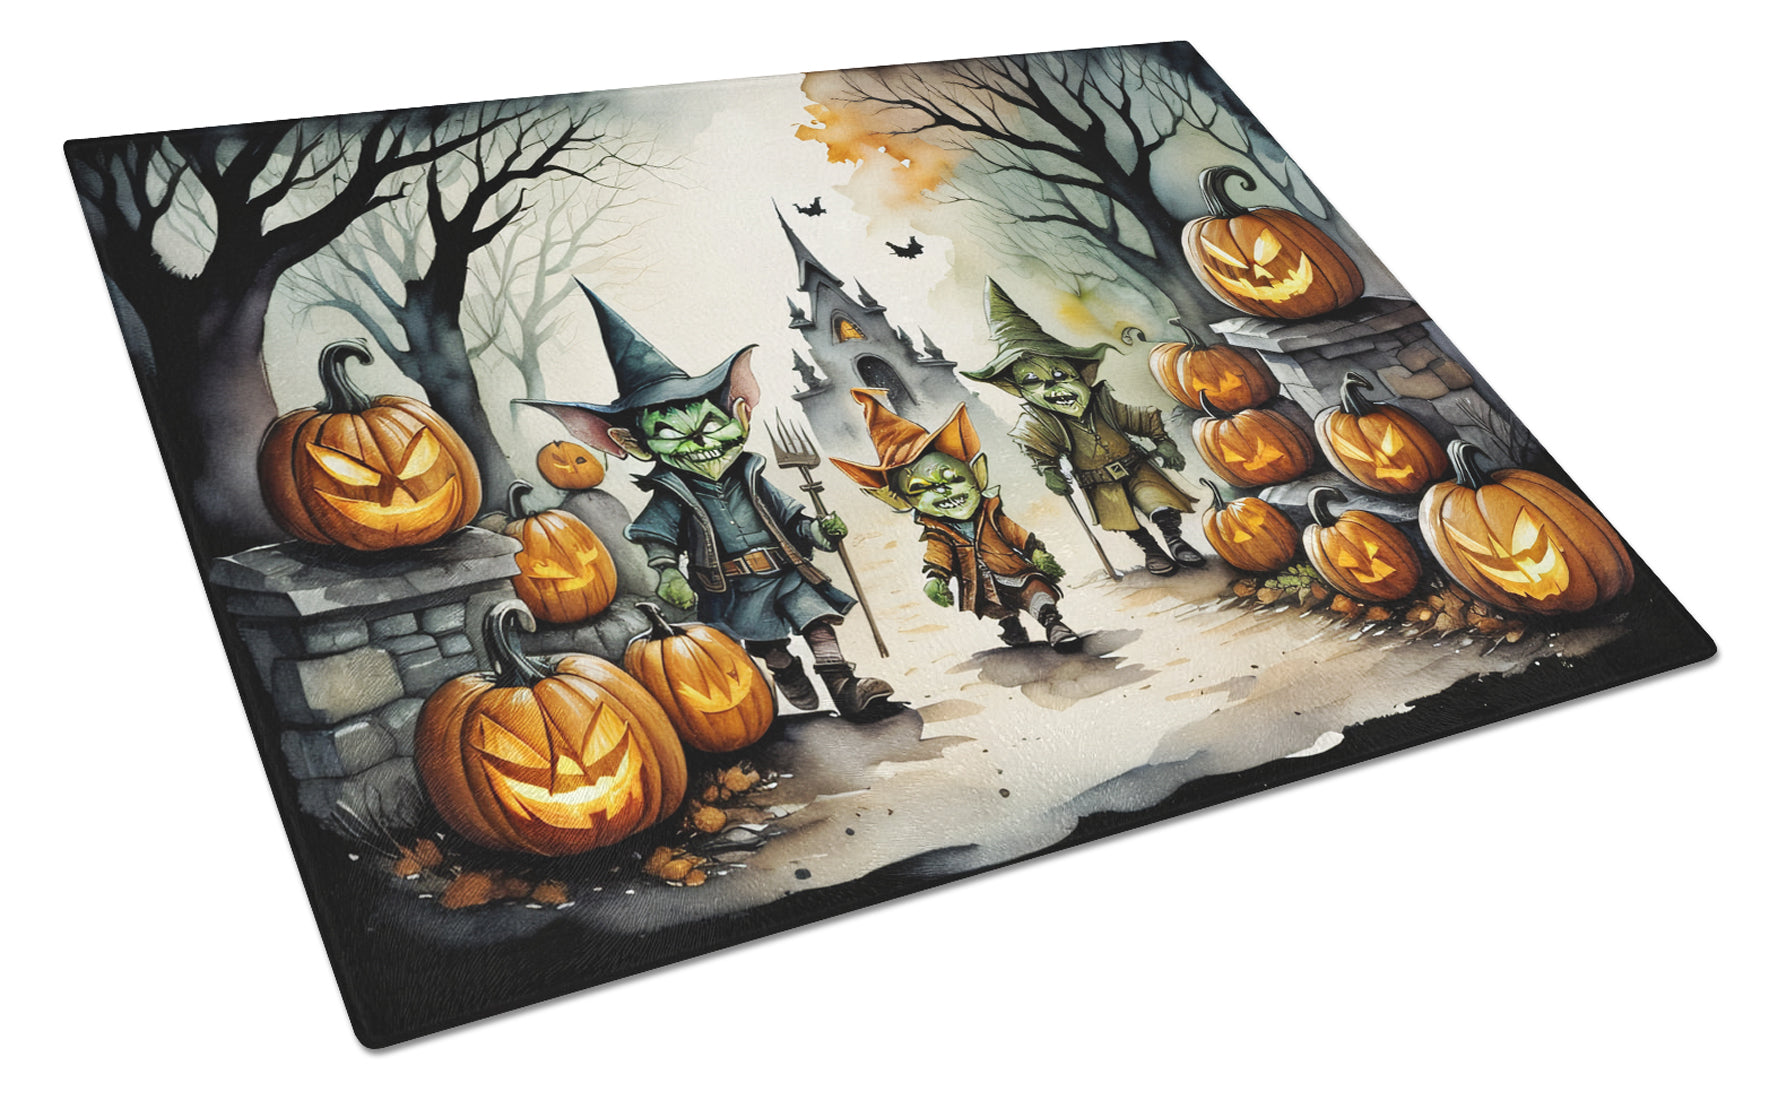 Buy this Goblins Spooky Halloween Glass Cutting Board Large